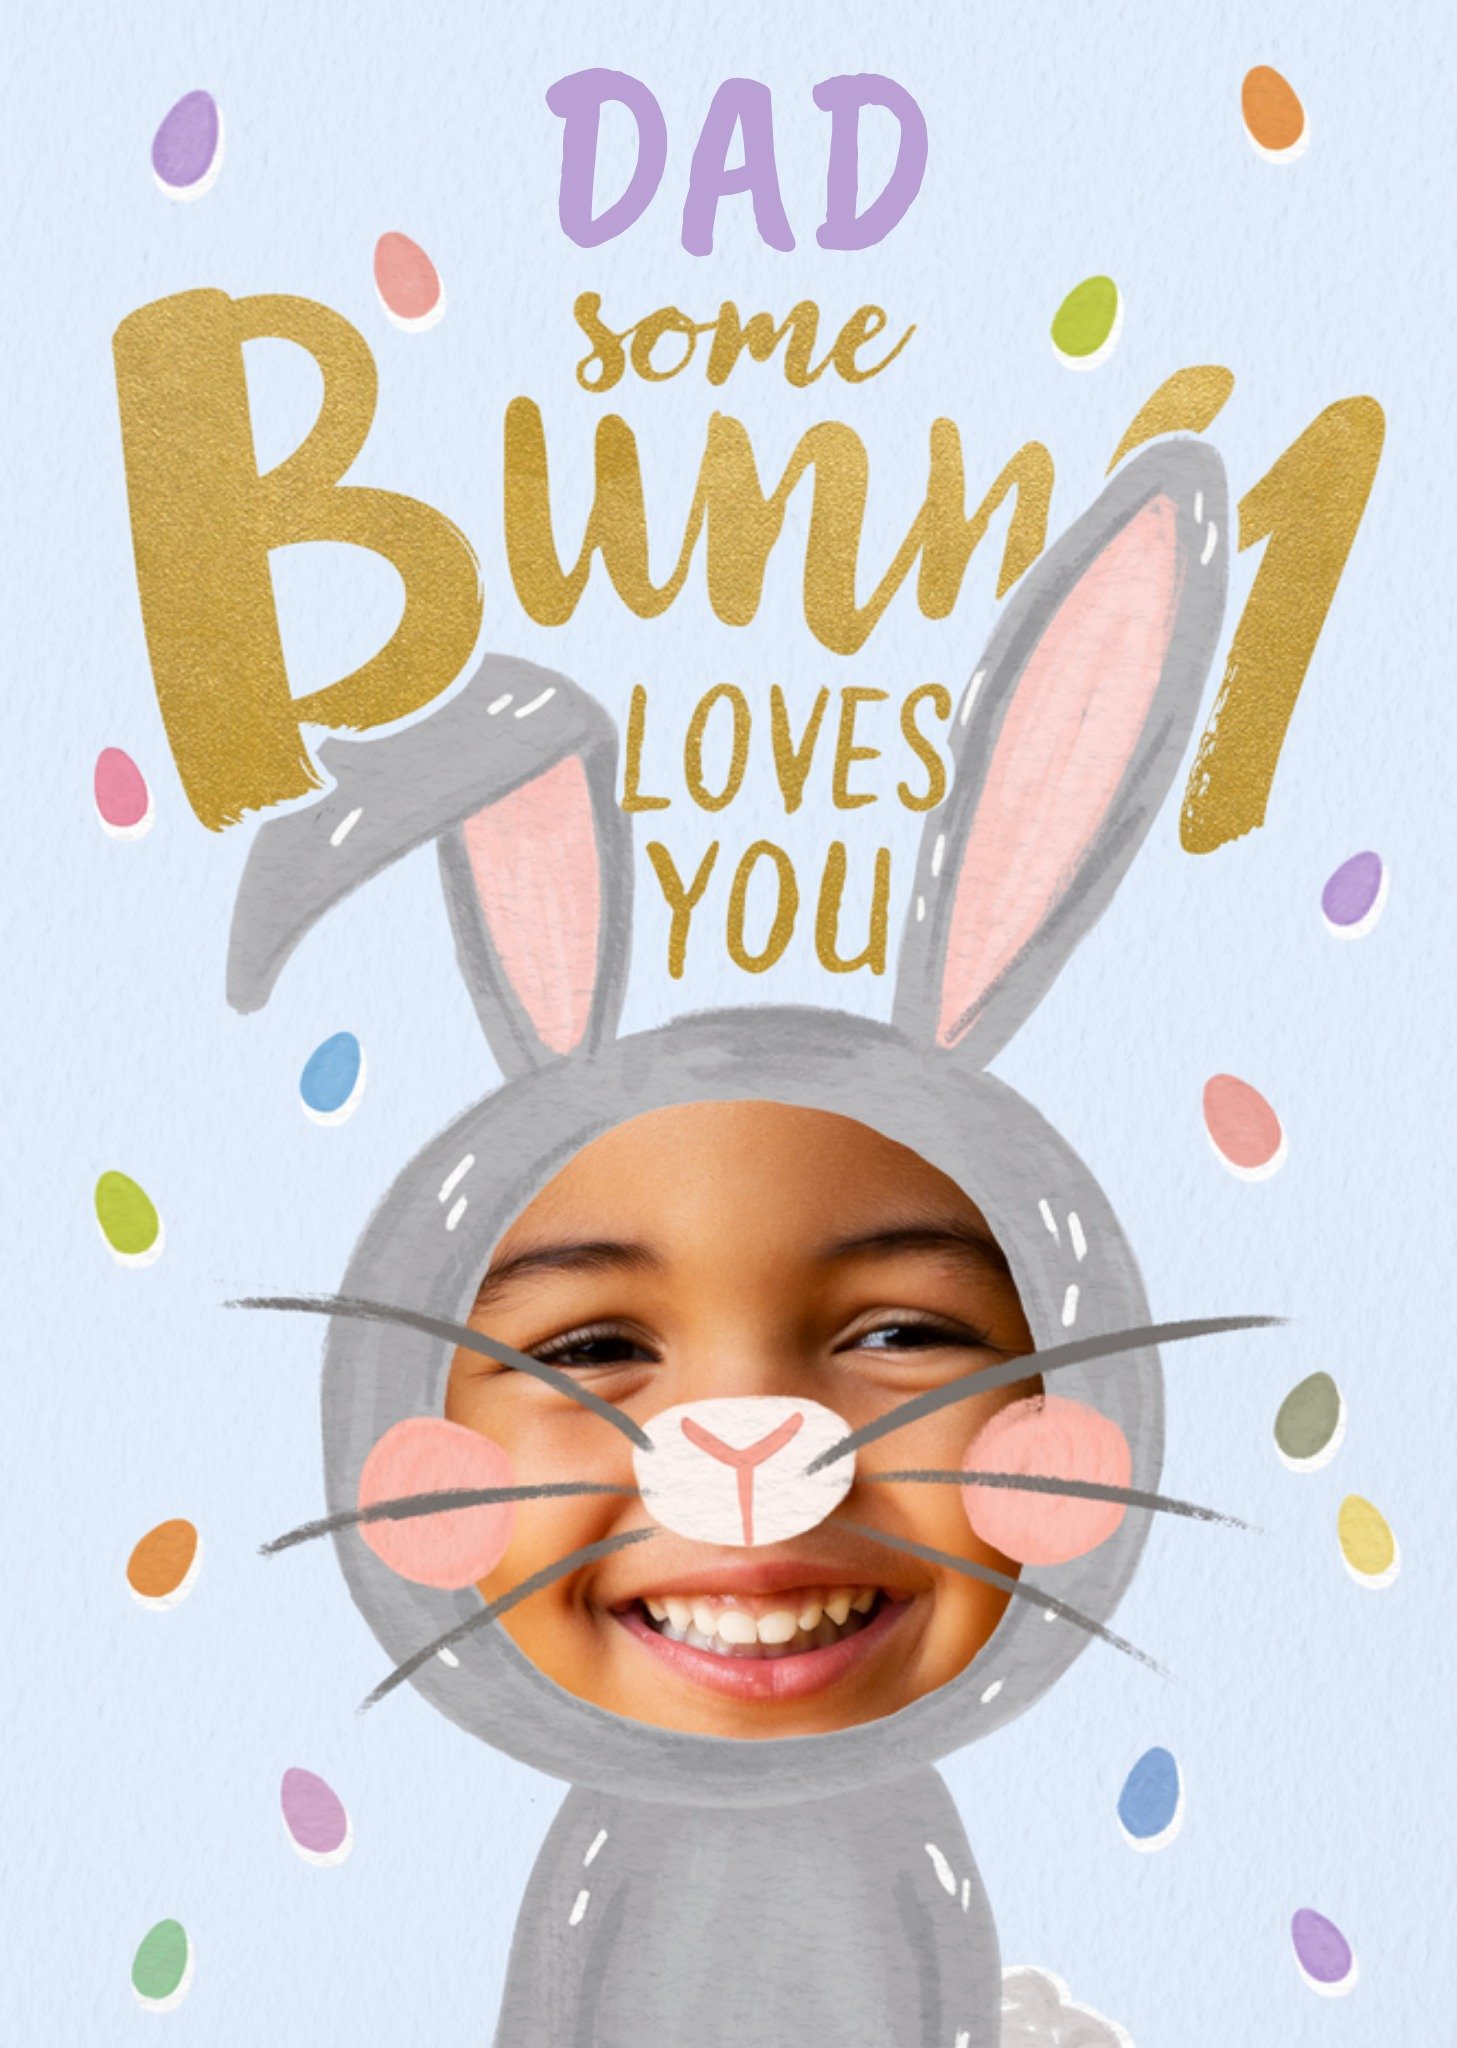 Moonpig Dad Some Bunny Loves You Photo Upload Easter Card, Large